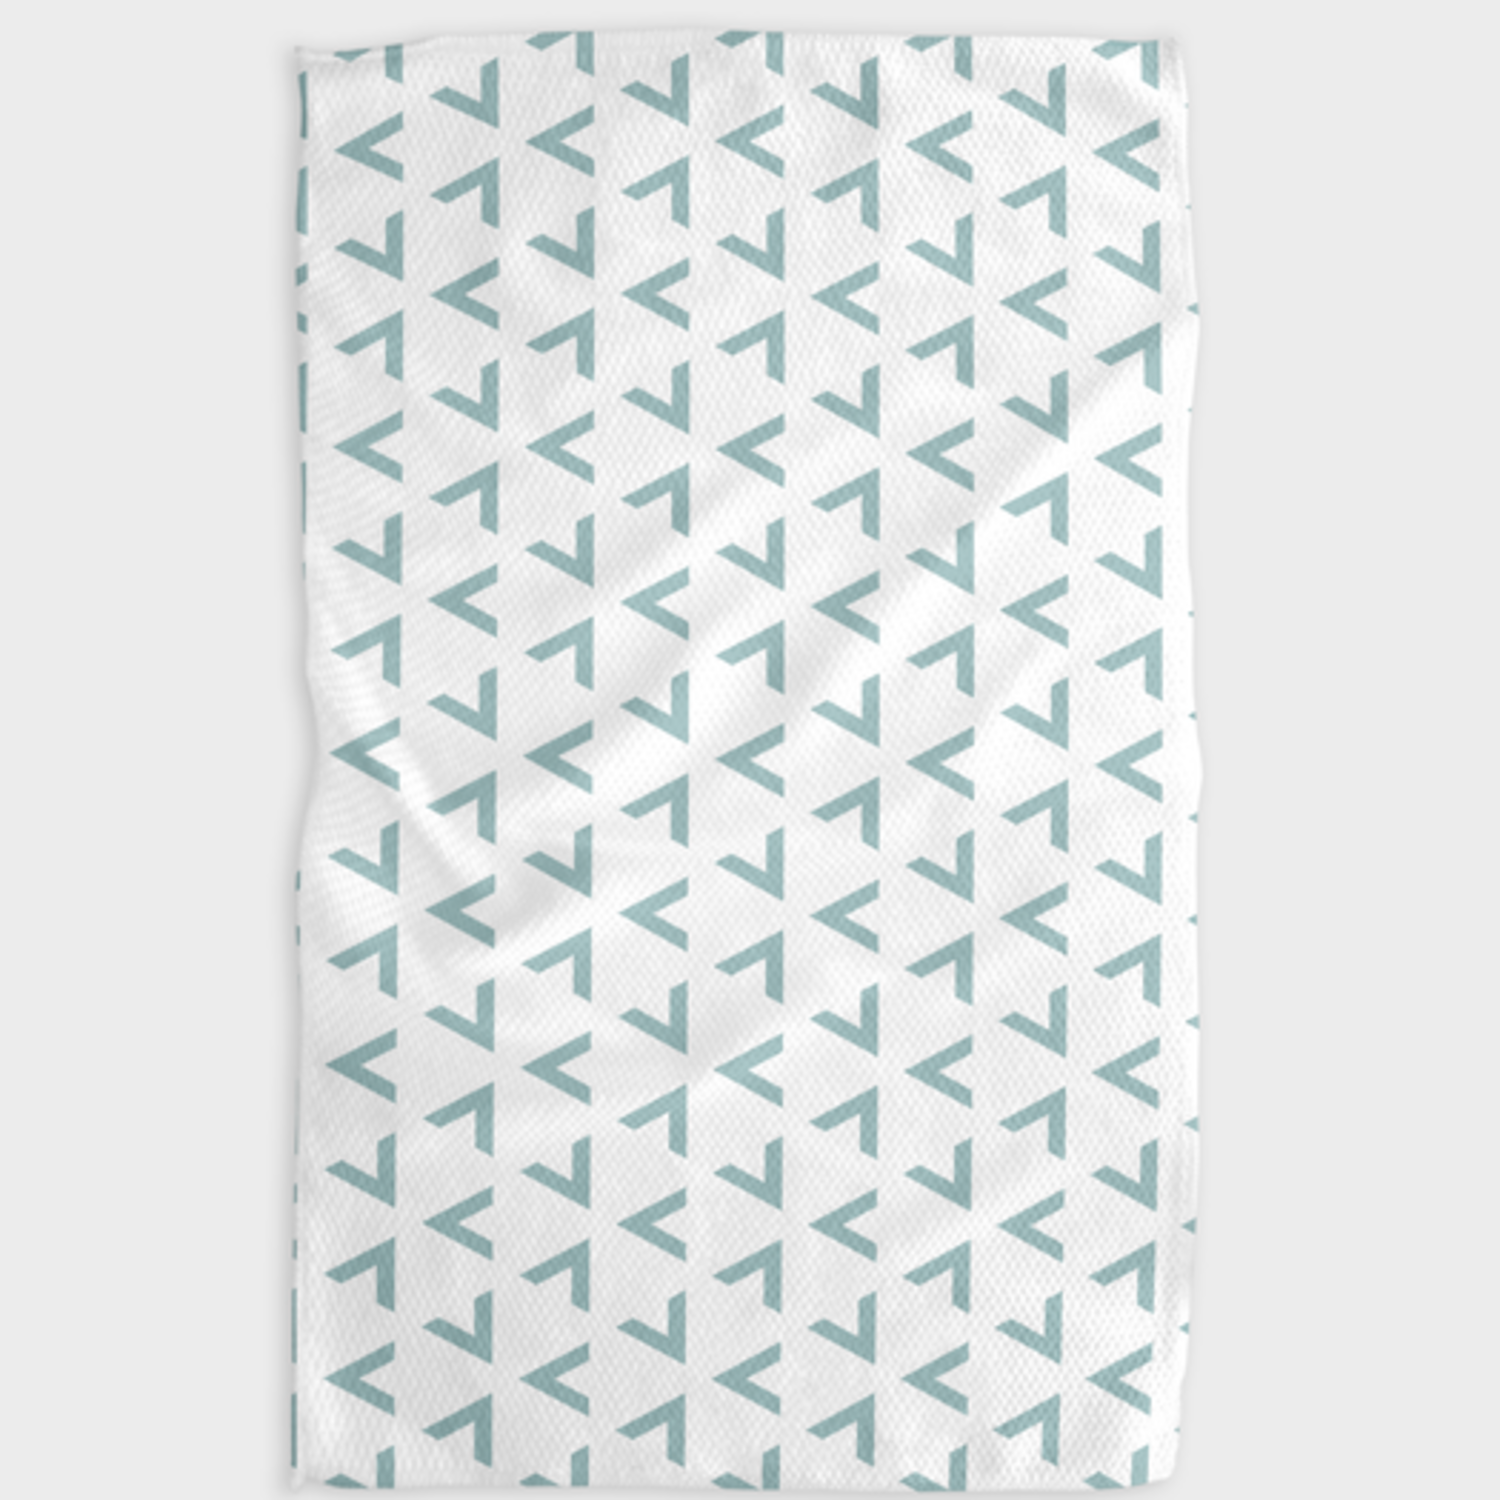 Geometry Towels Discount Code - A Slice of Style